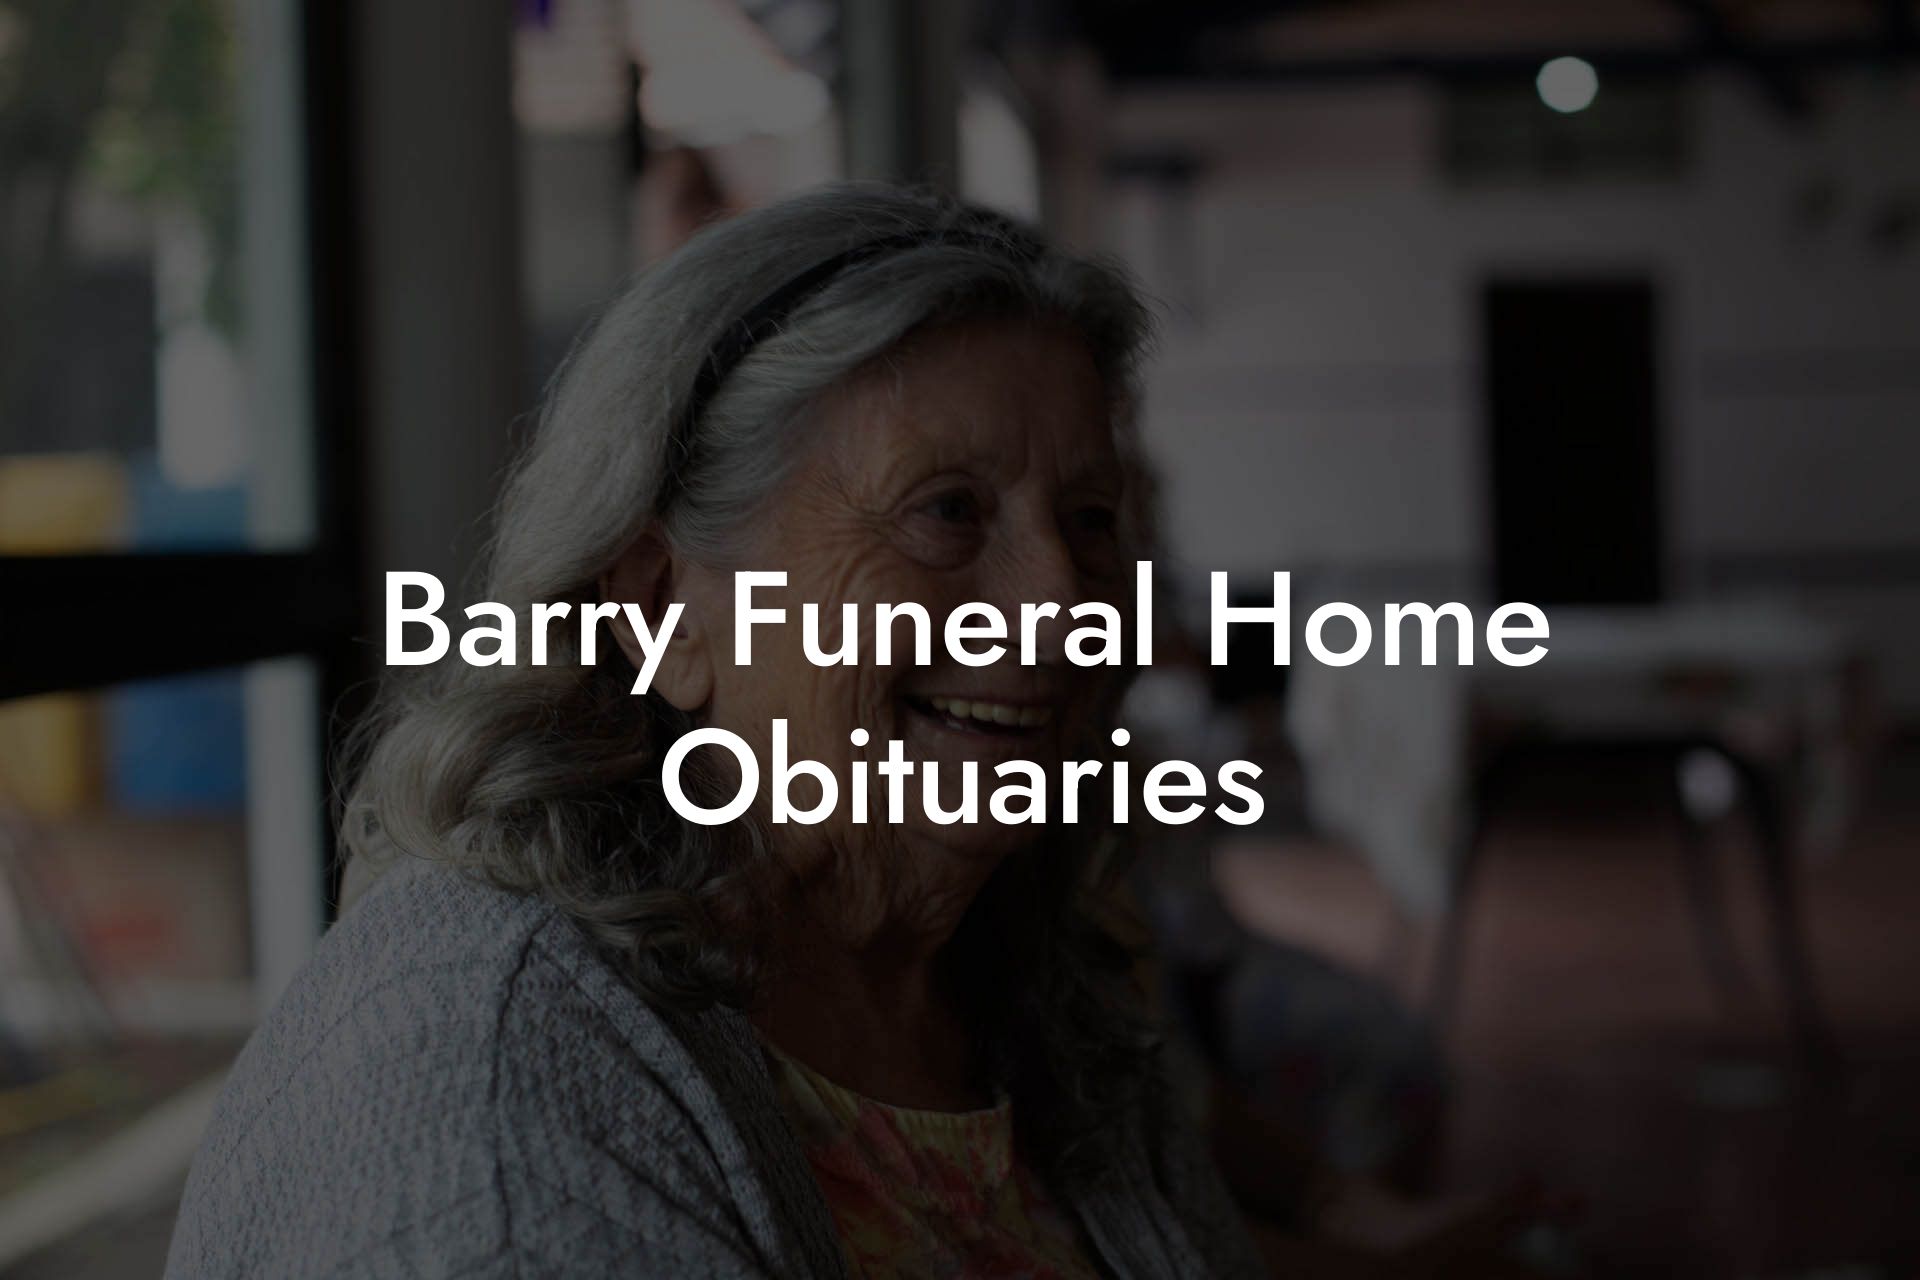 Barry Funeral Home Obituaries